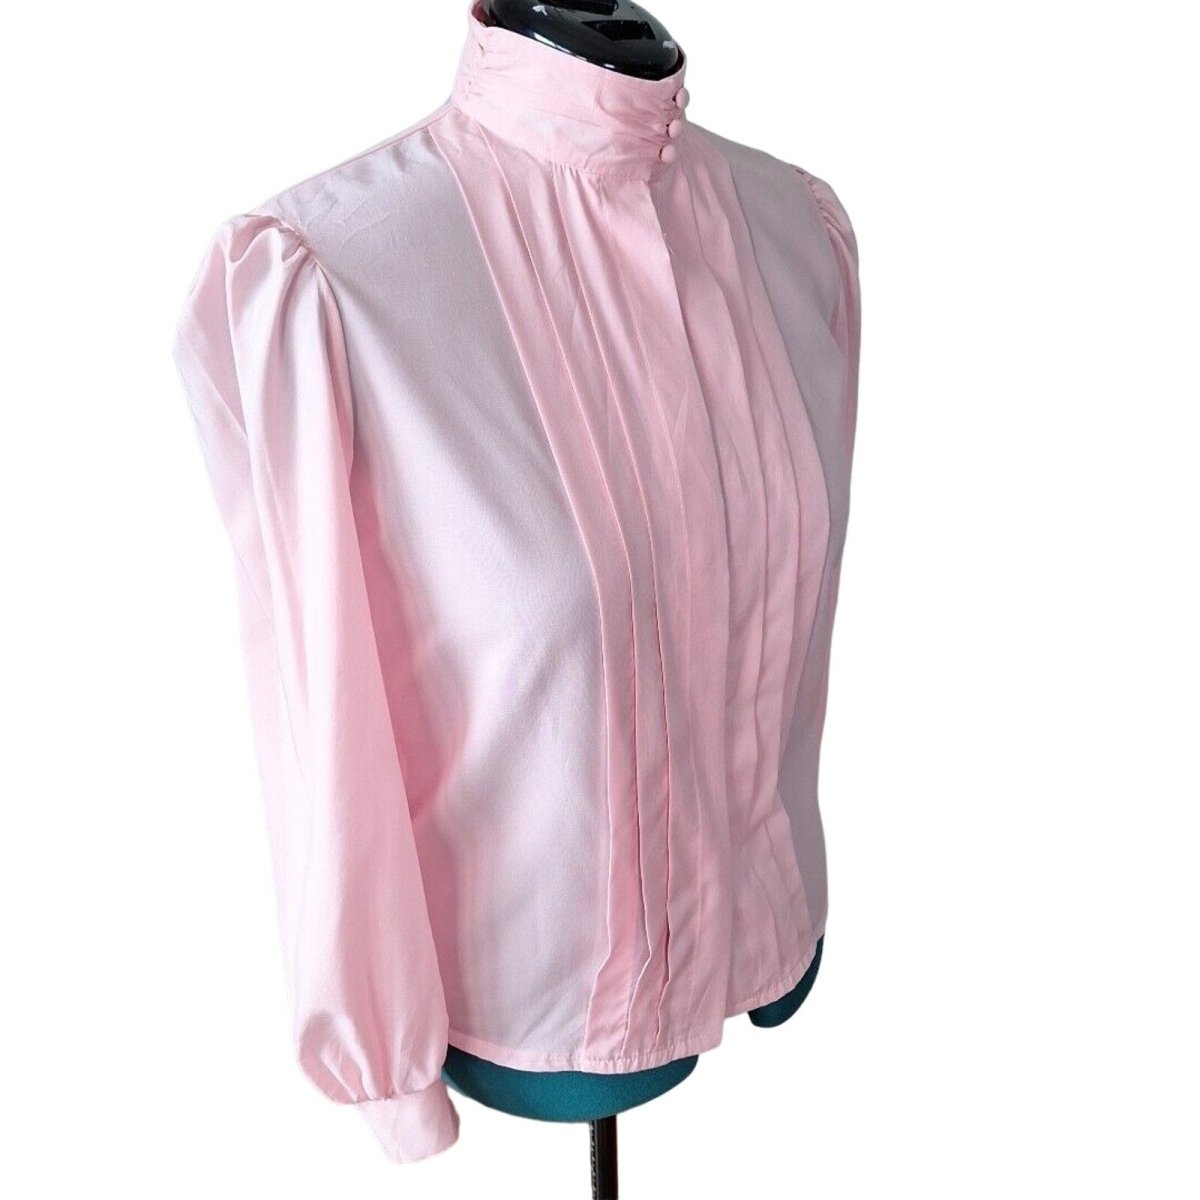 Vintage 80s High Neck Pleated Secretary Blouse Size M/L Women - themallvintage The Mall Vintage 1980s New Arrival Tops